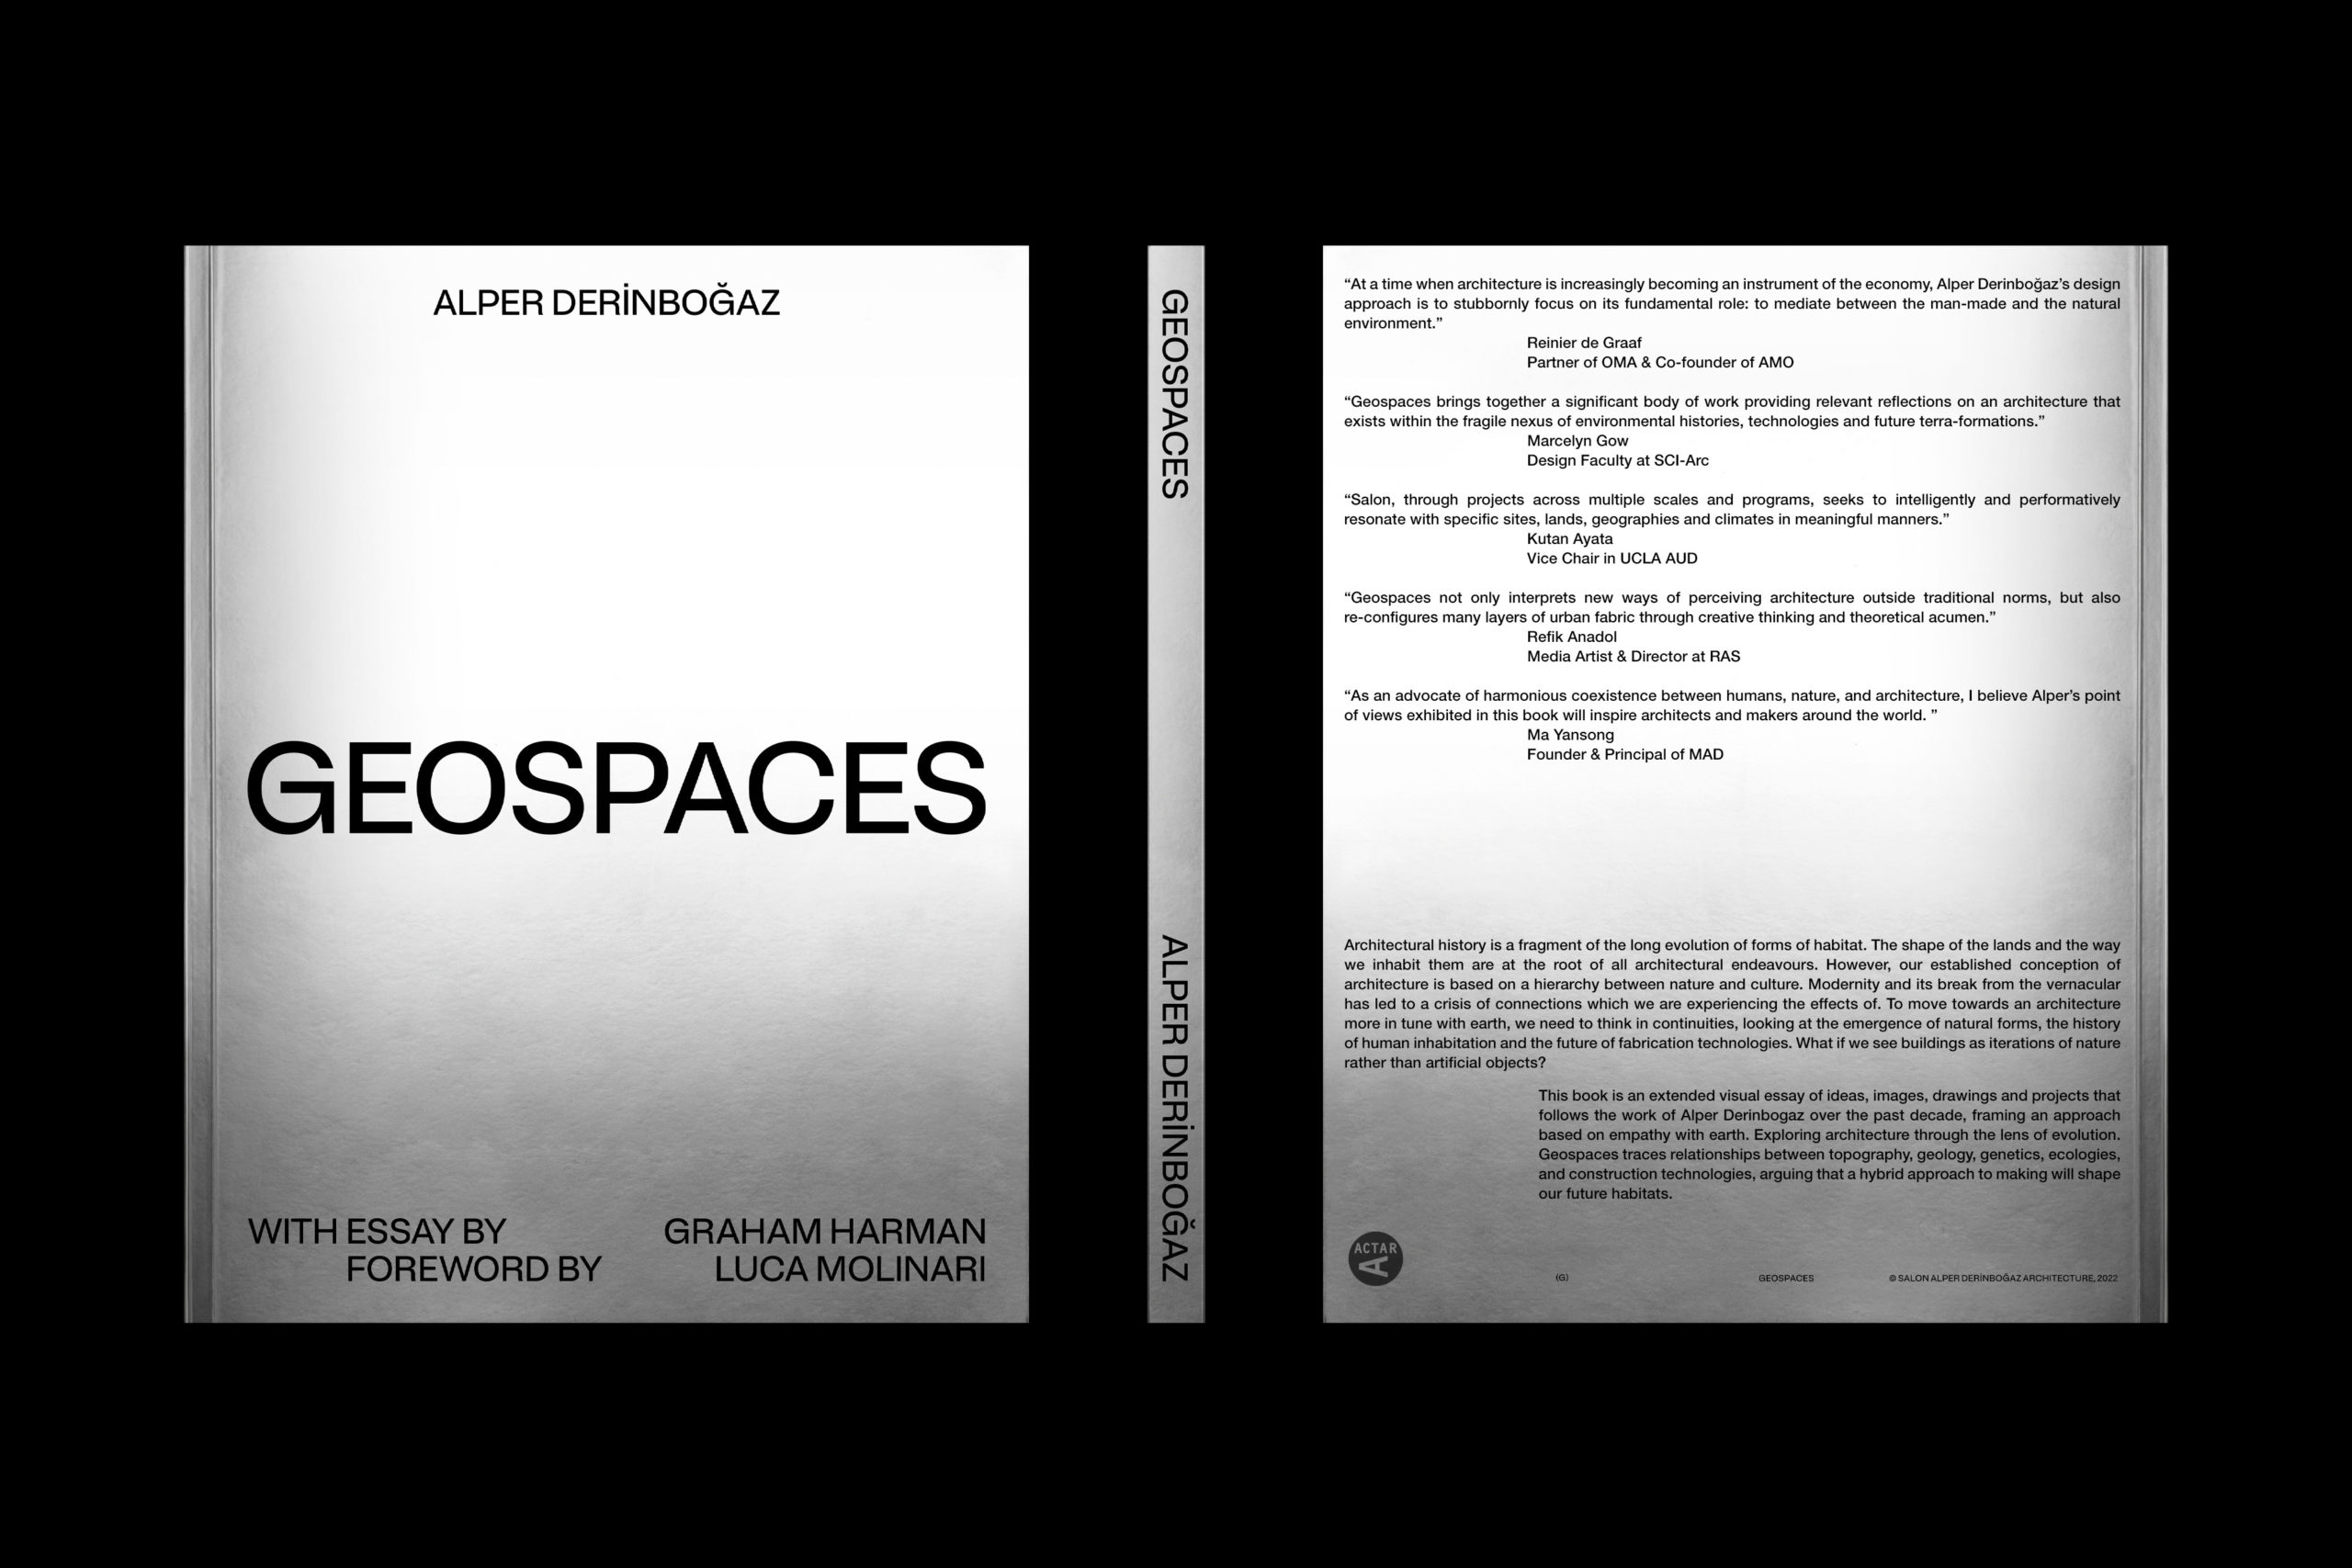 Geospaces book covers